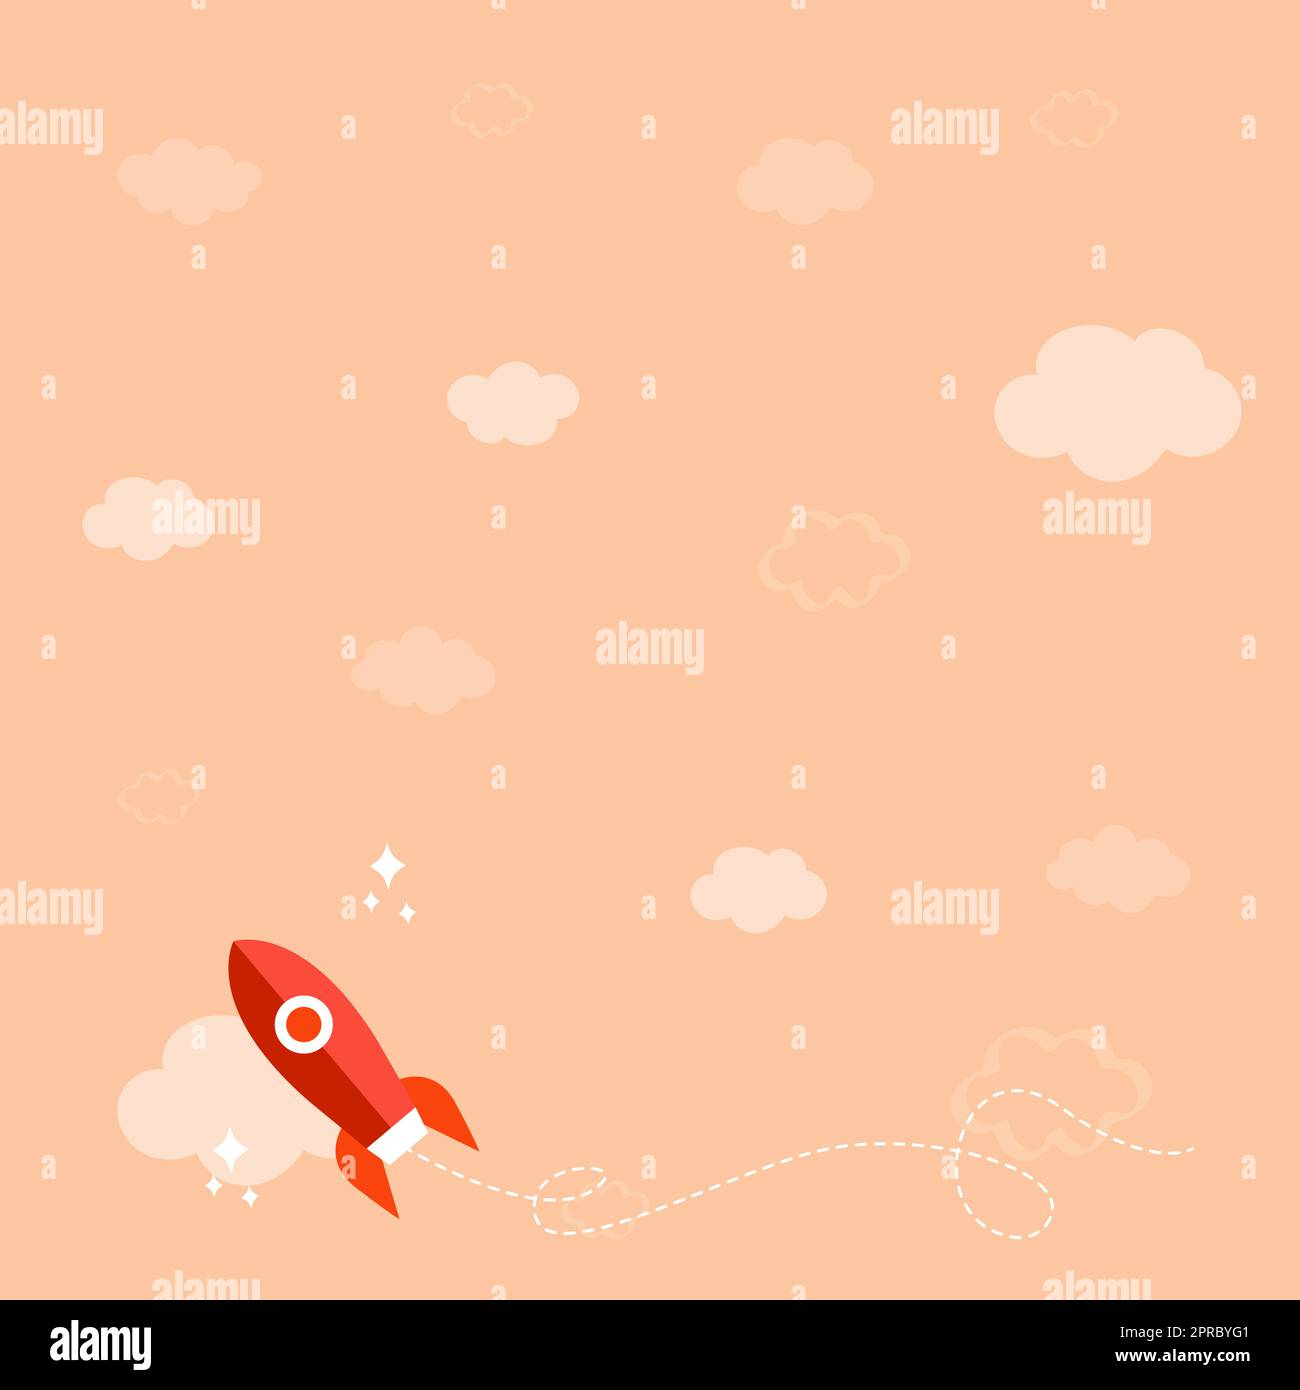 Rocket Ship Launching Fast Straight Up To The Outer Space. Spaceship Drawing Flying High At Sky. Space Shuttle Cartoon Floating At The Air. Stock Vector